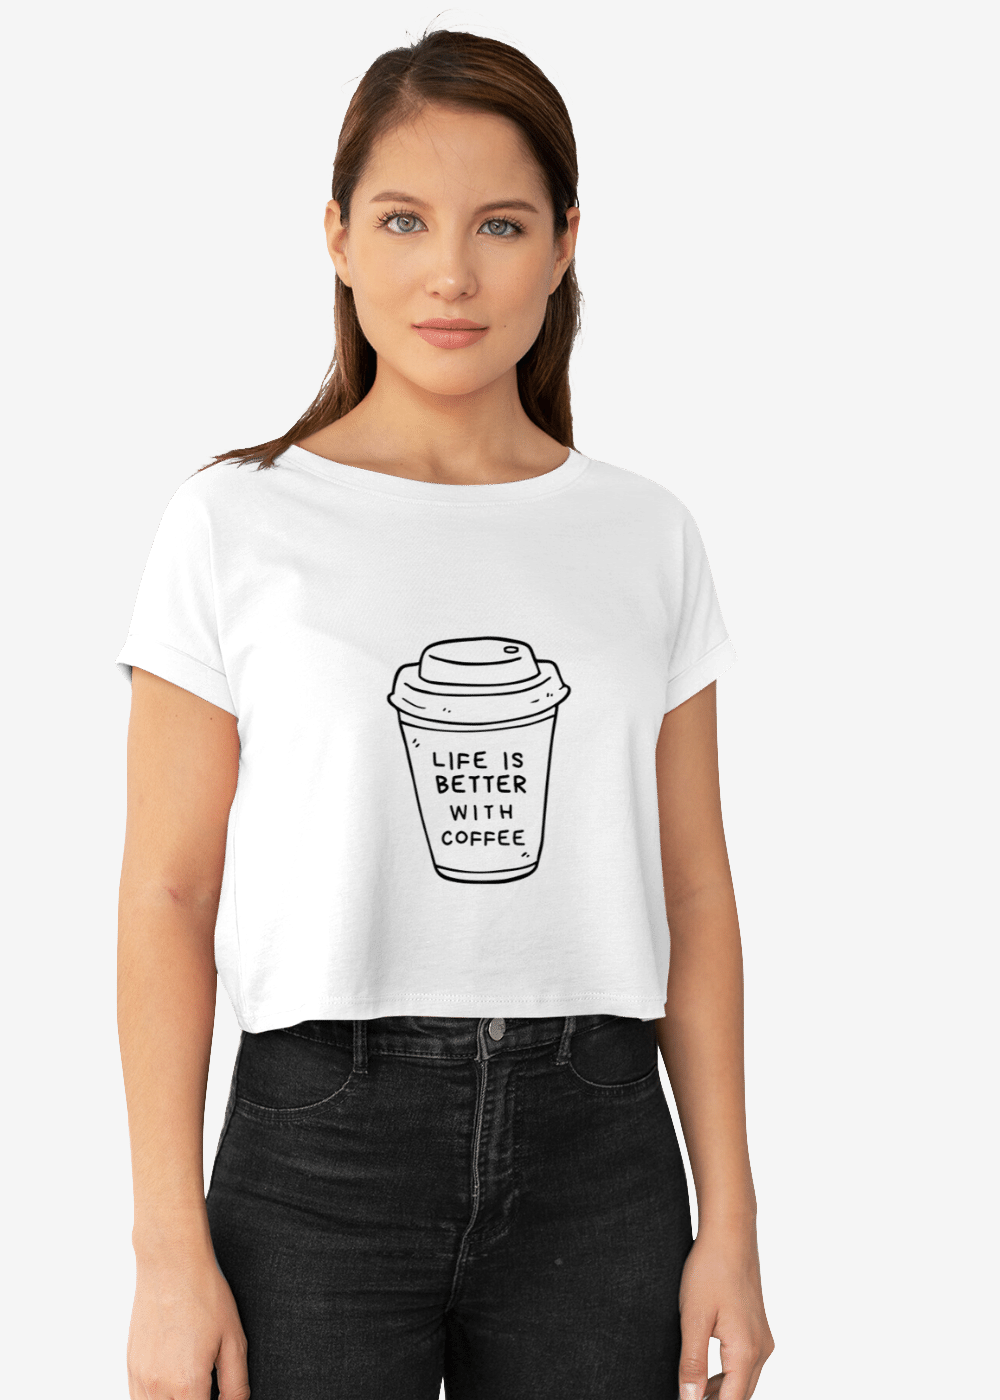 Crop Top Shirt Active Wear for Woman and Coffee Lovers Gift